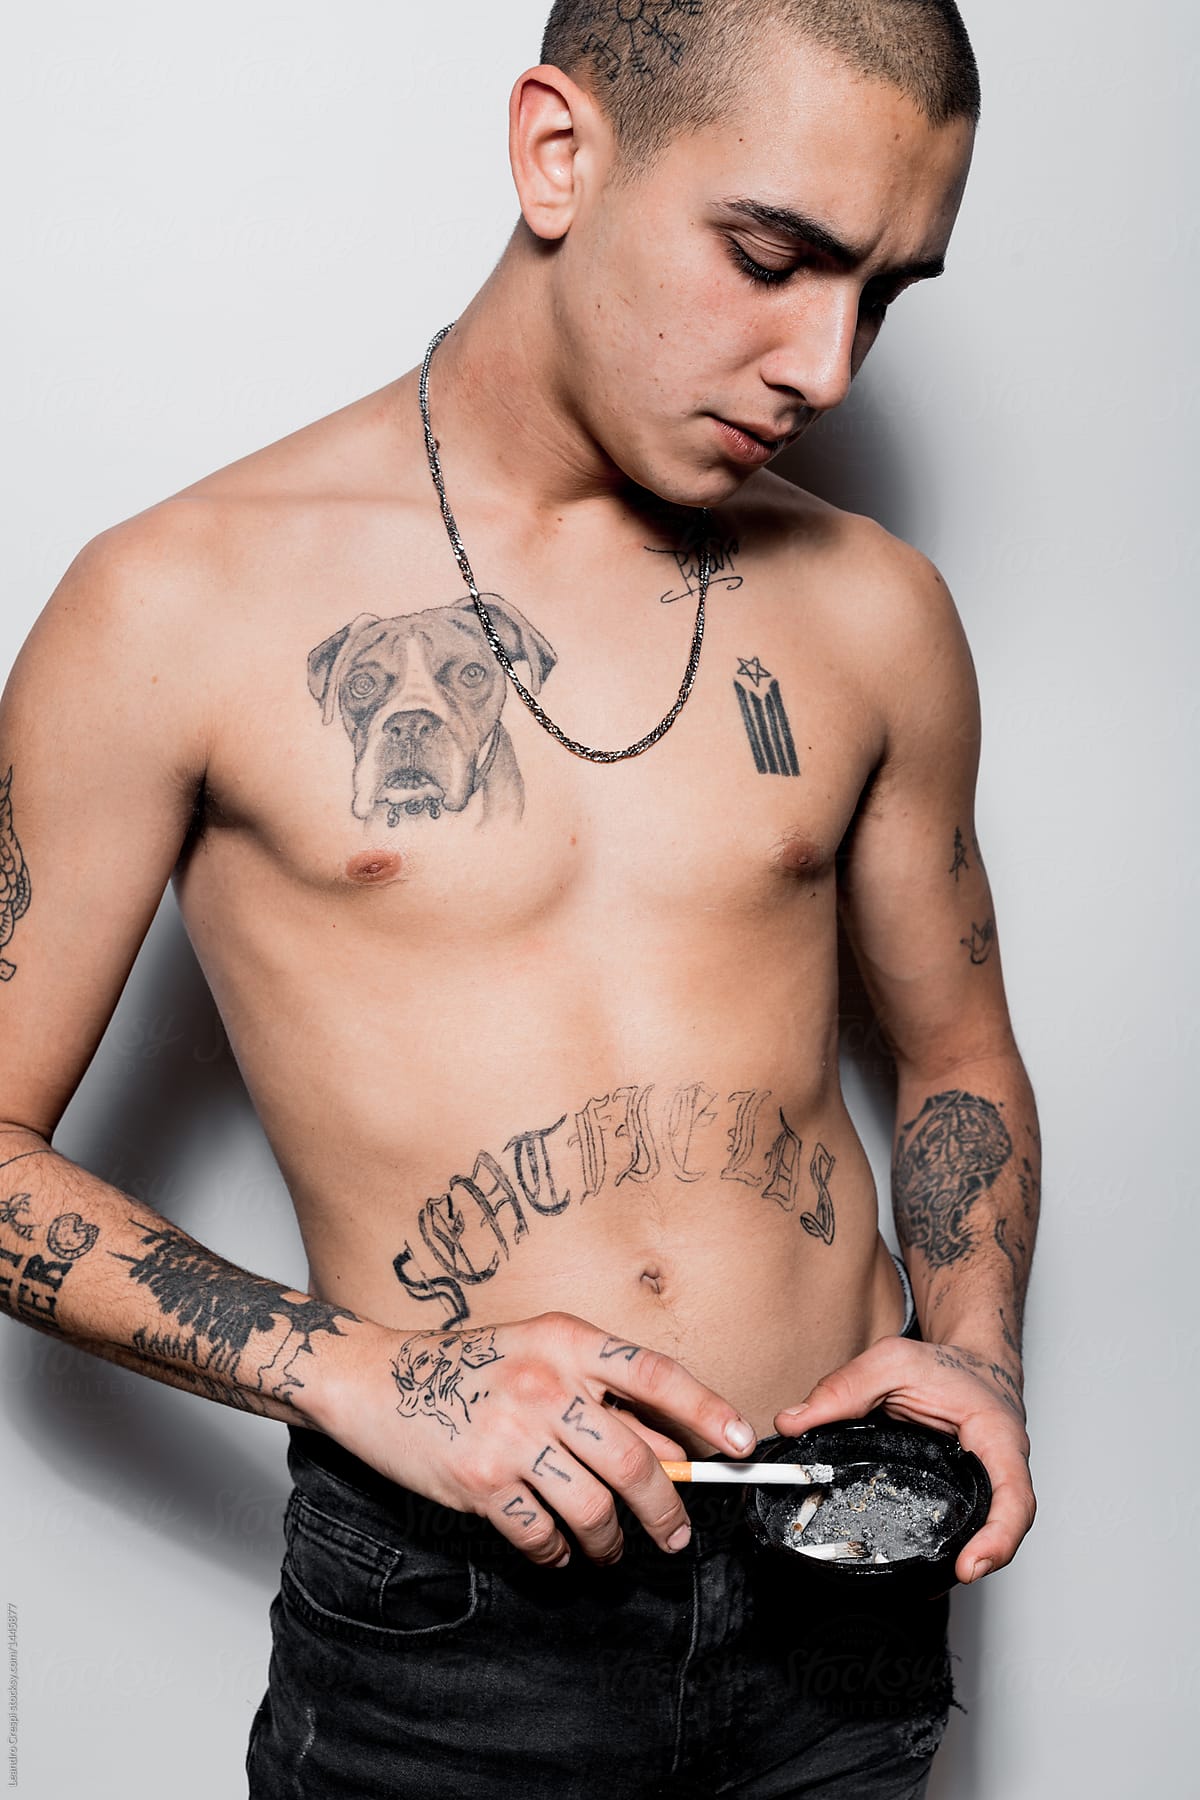 Tattooed shirtless young man portrait isolated over white wall